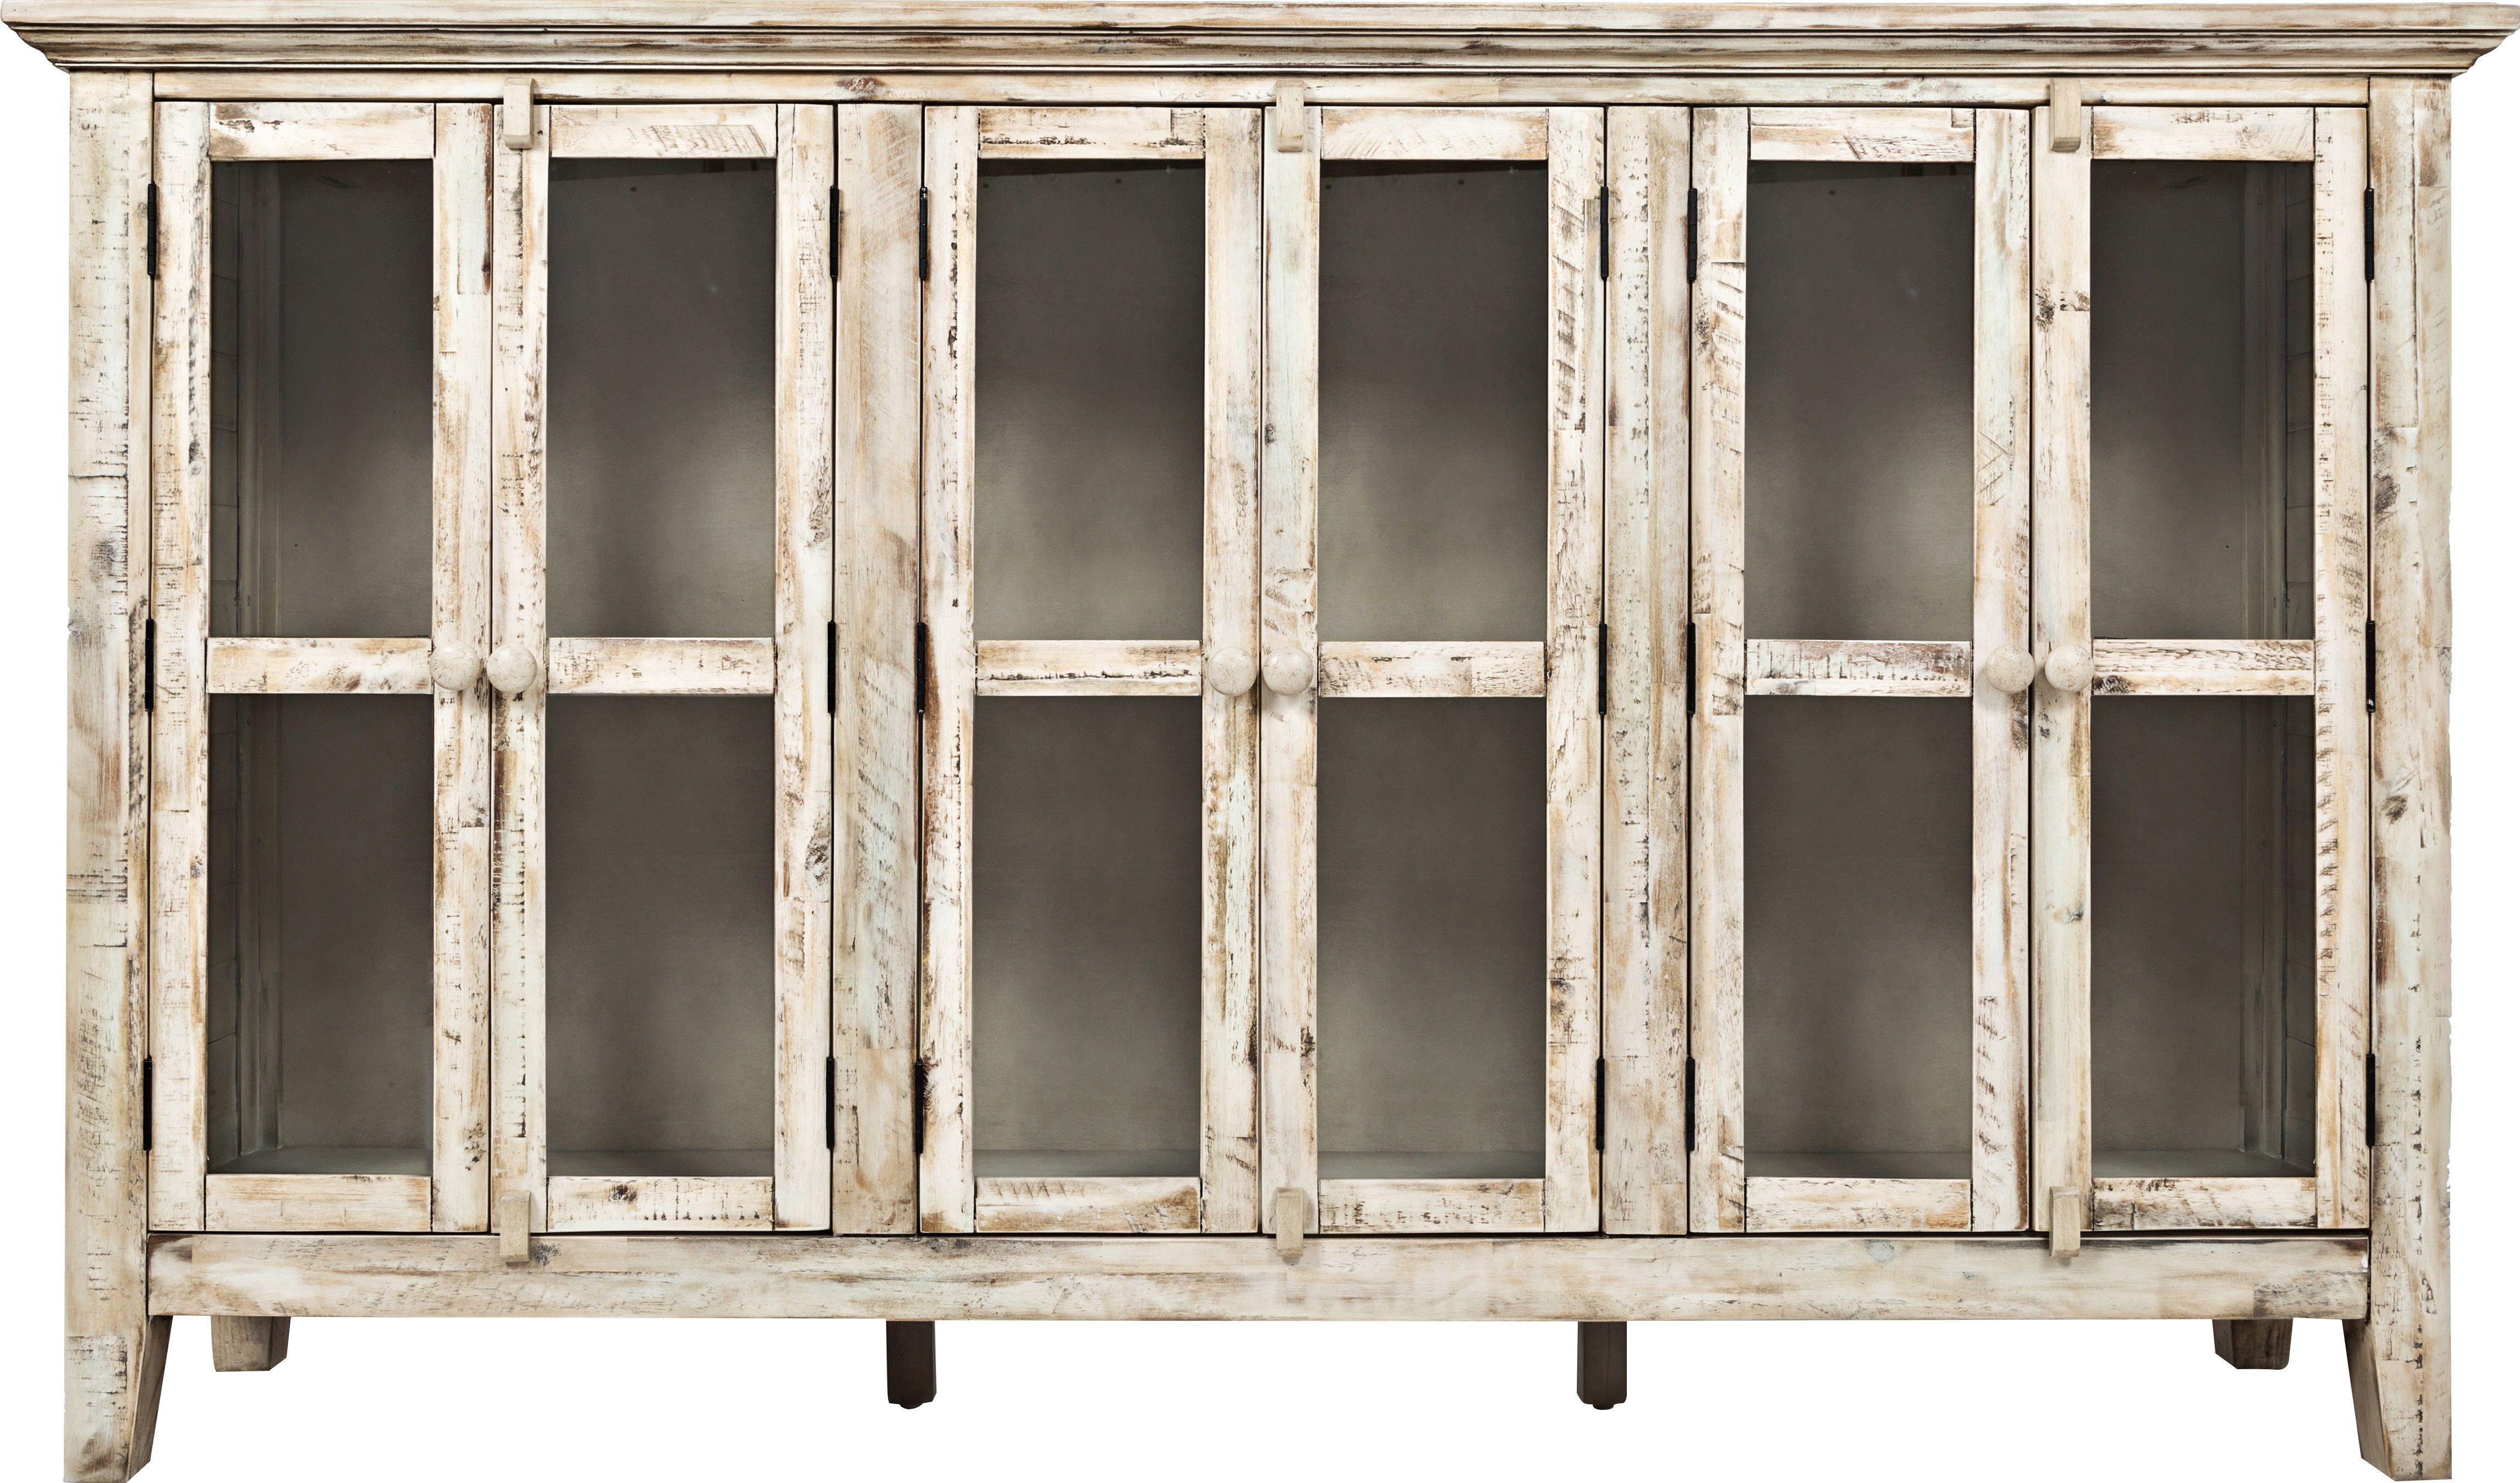 Farmhouse & Rustic Accent Chests & Cabinets | Birch Lane For Wooden Curio Buffets With Two Glass Doors (View 22 of 30)